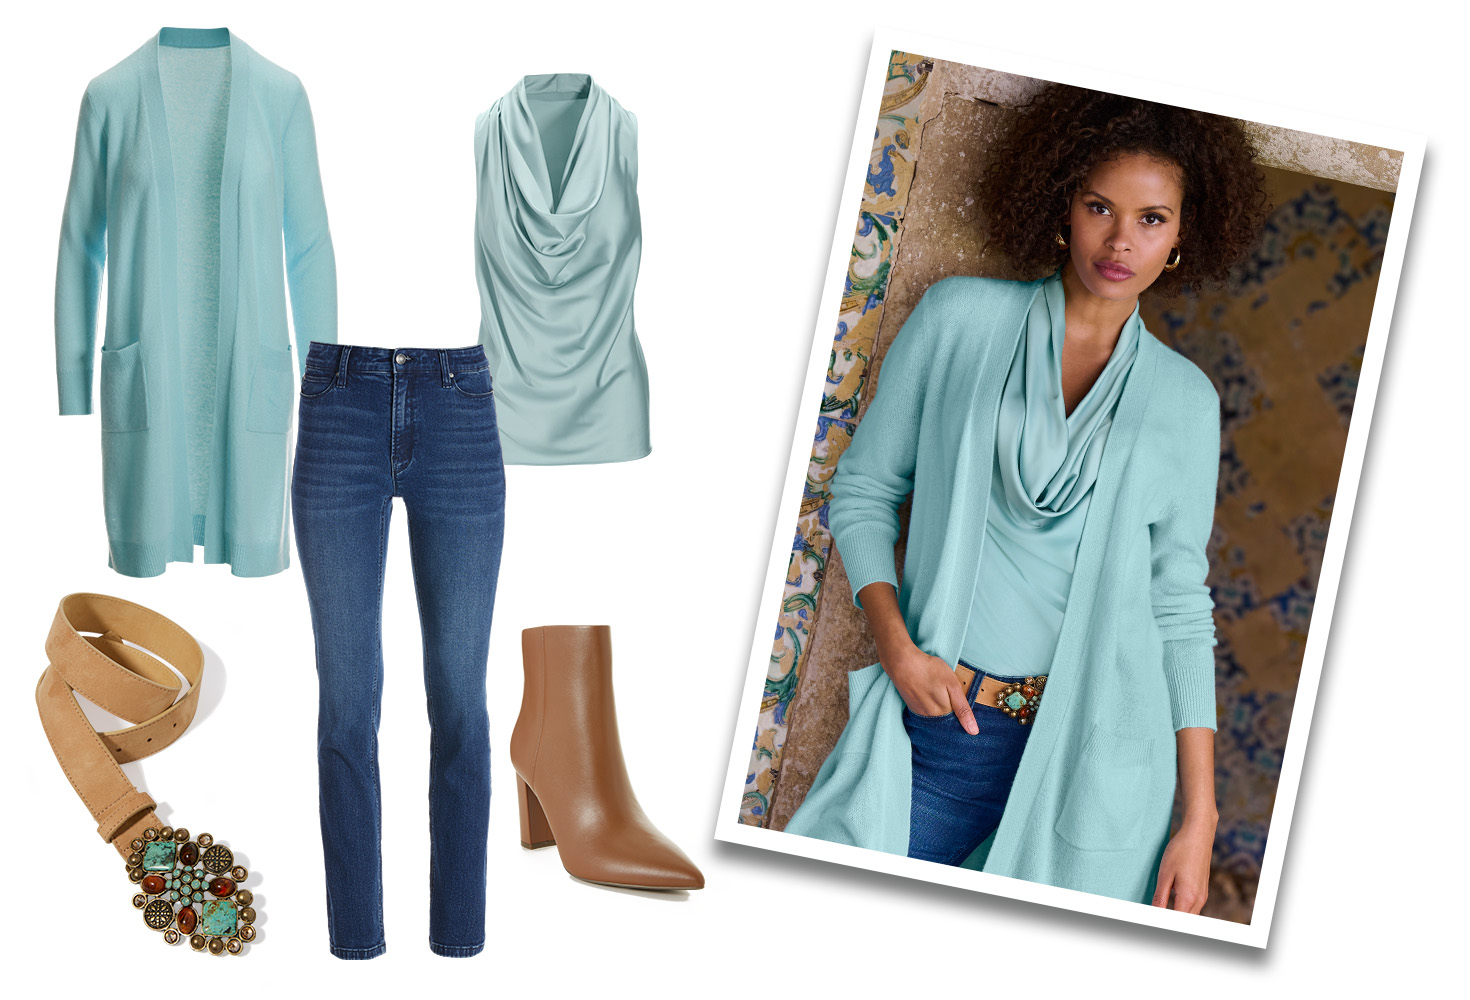 model wearing a light blue cashmere cardigan, light blue cowl neck charmeuse blouse, turquoise stone embellished belt, brown leather booties, and jeans. left panel shows all items off model.